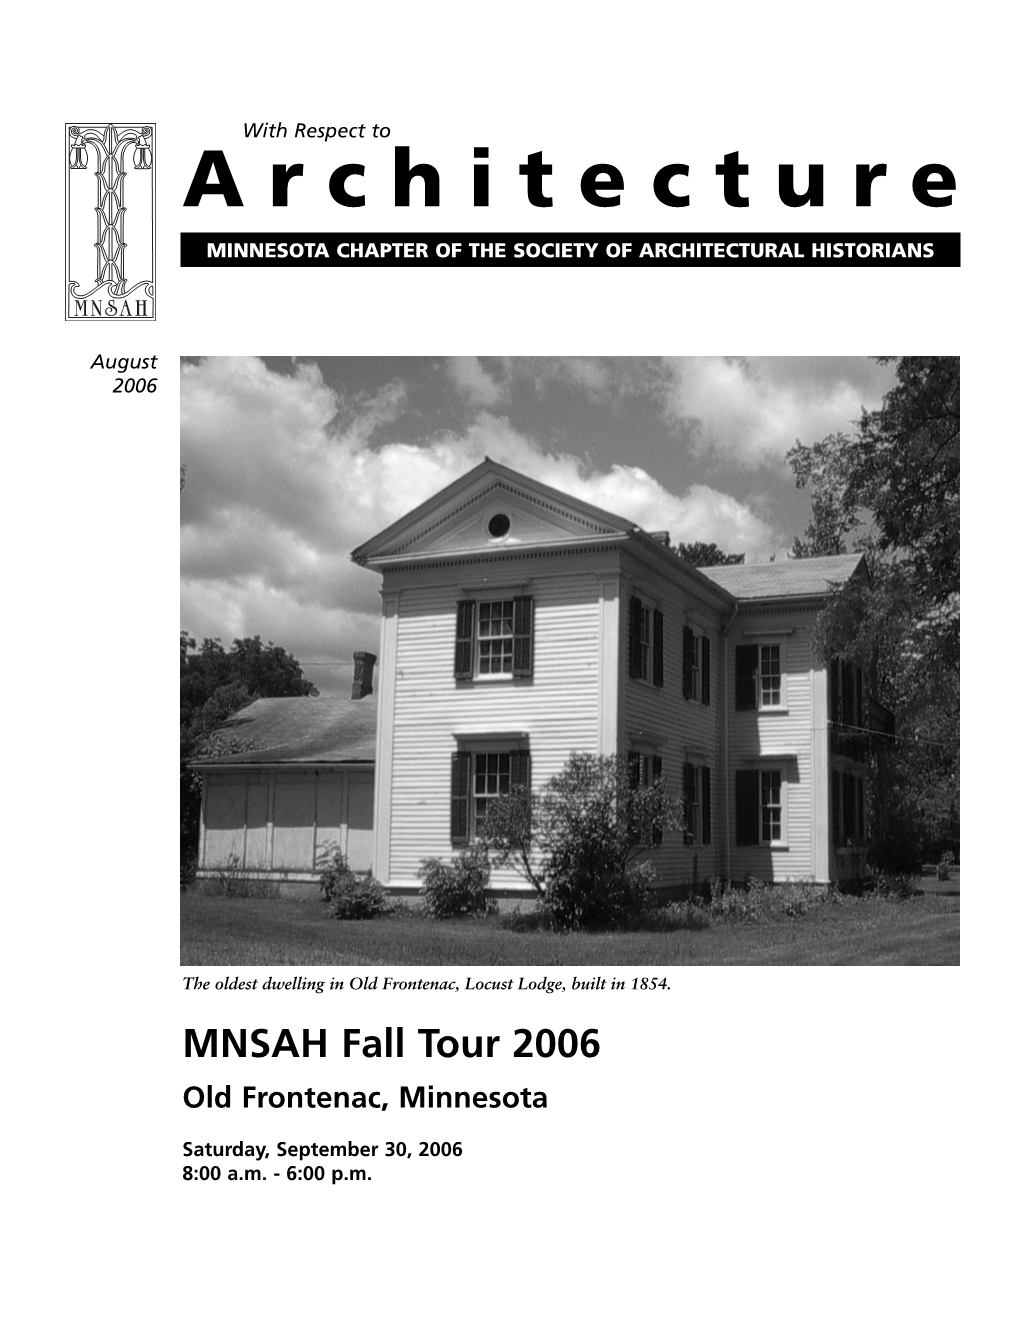 With Respect to Architecture, August 2006